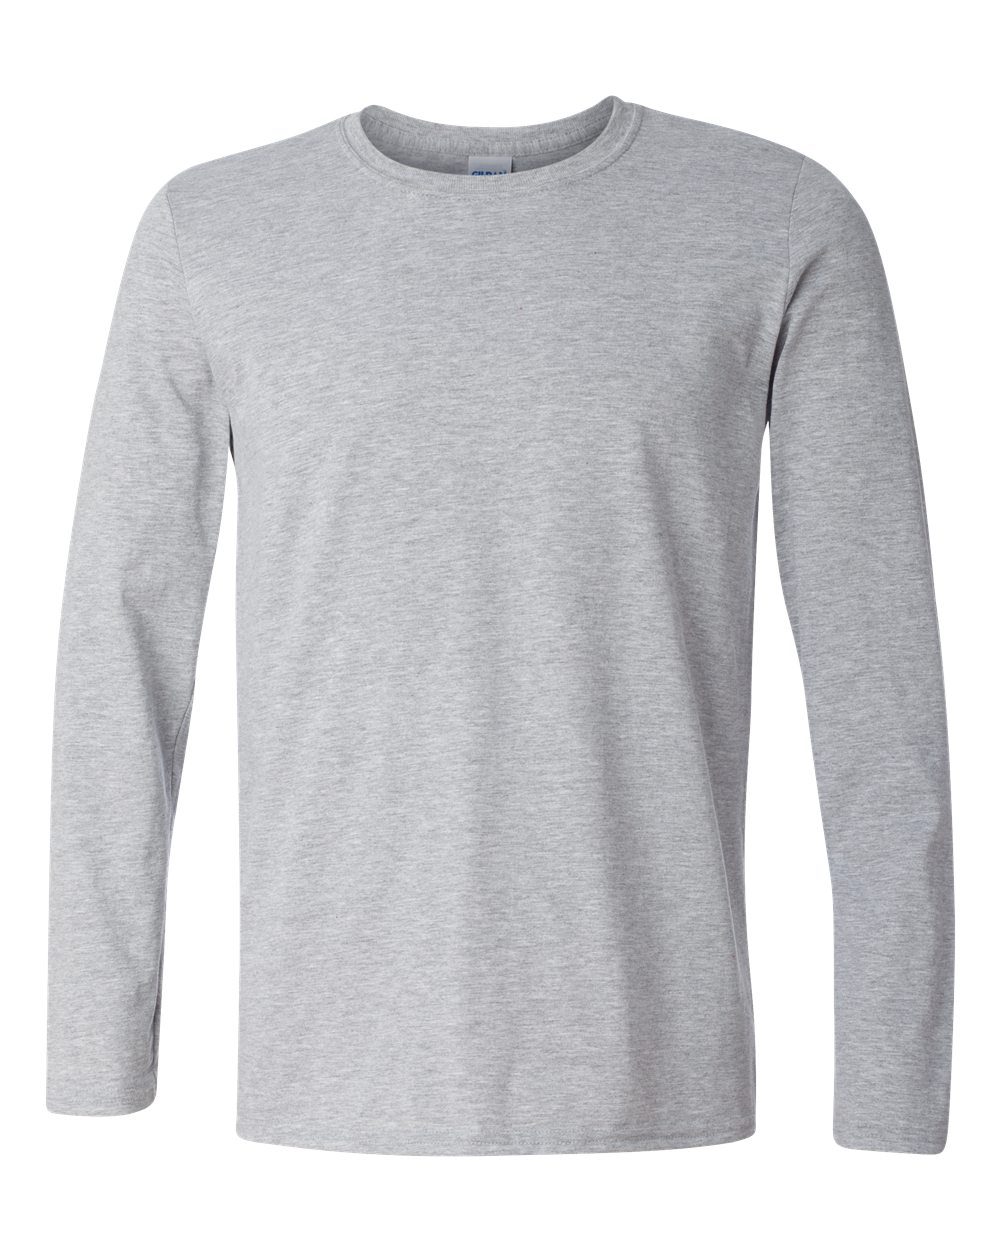 Gildan Mens Blank Cotton Softstyle Long Sleeve Fit T Shirt 64400 Up To 3XL